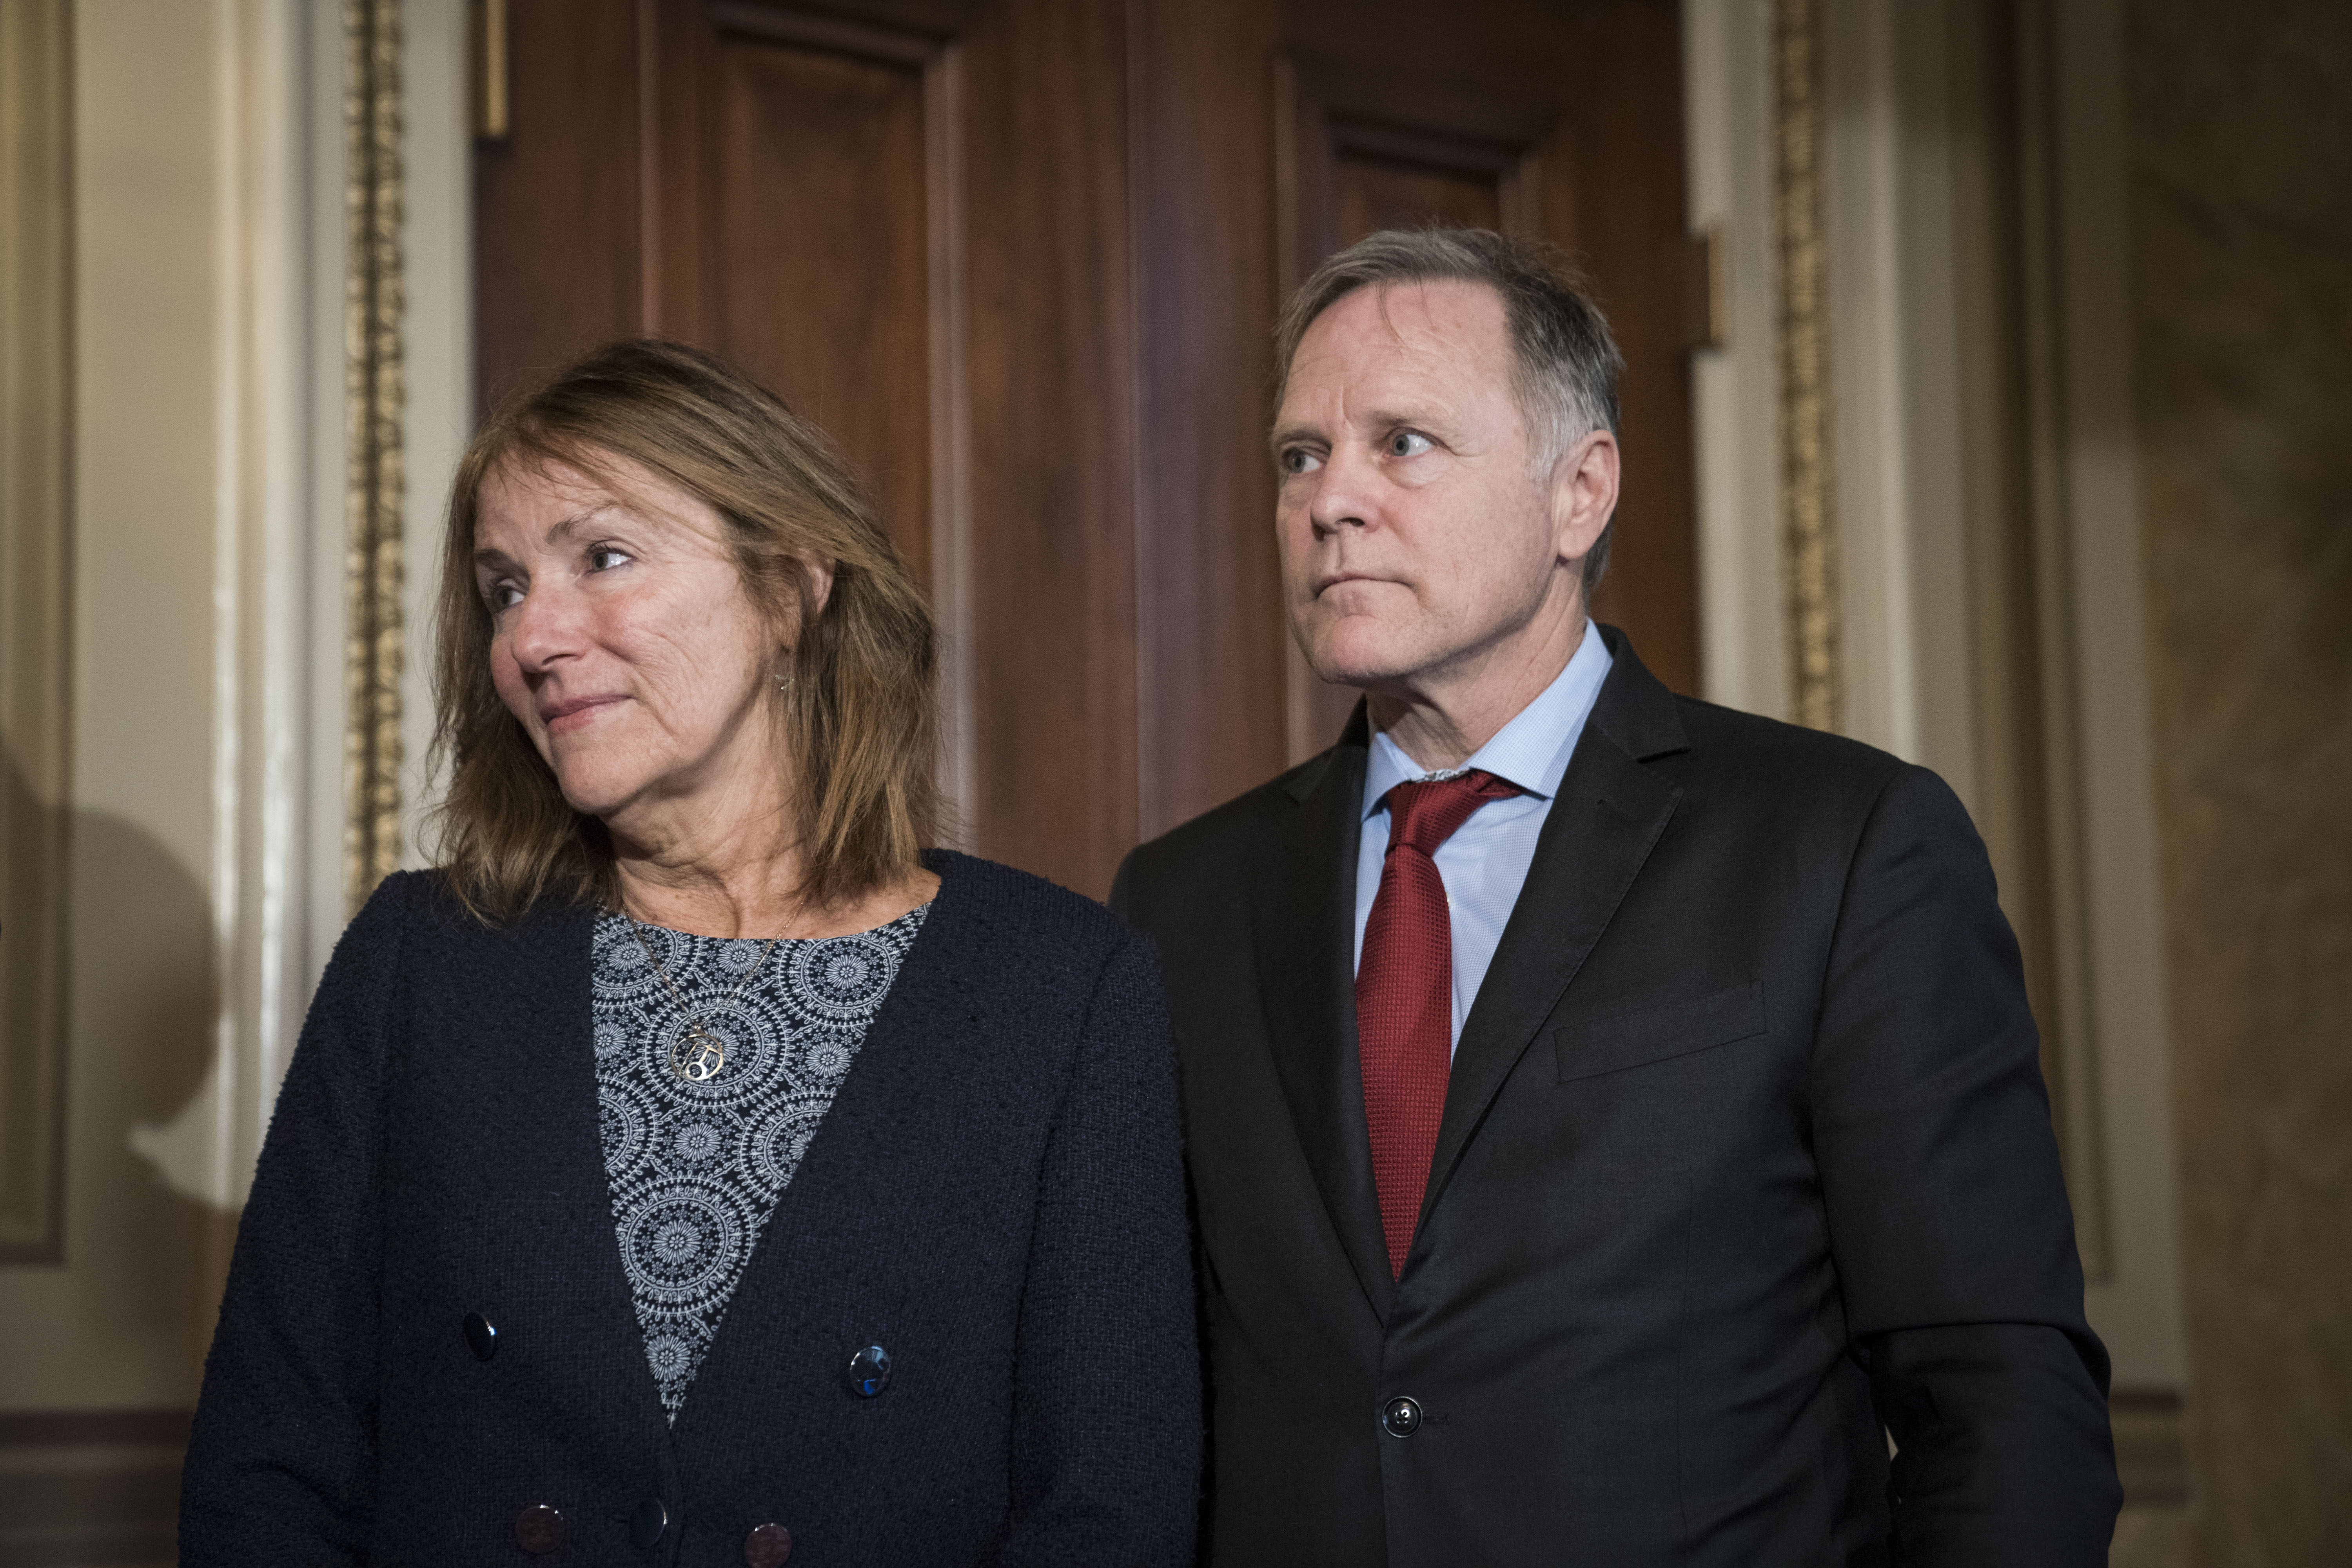 Cindy and Fred Warmbier, parents of Otto Warmbier, participate in a press conference in Washington, DC, on December 18, 2019.